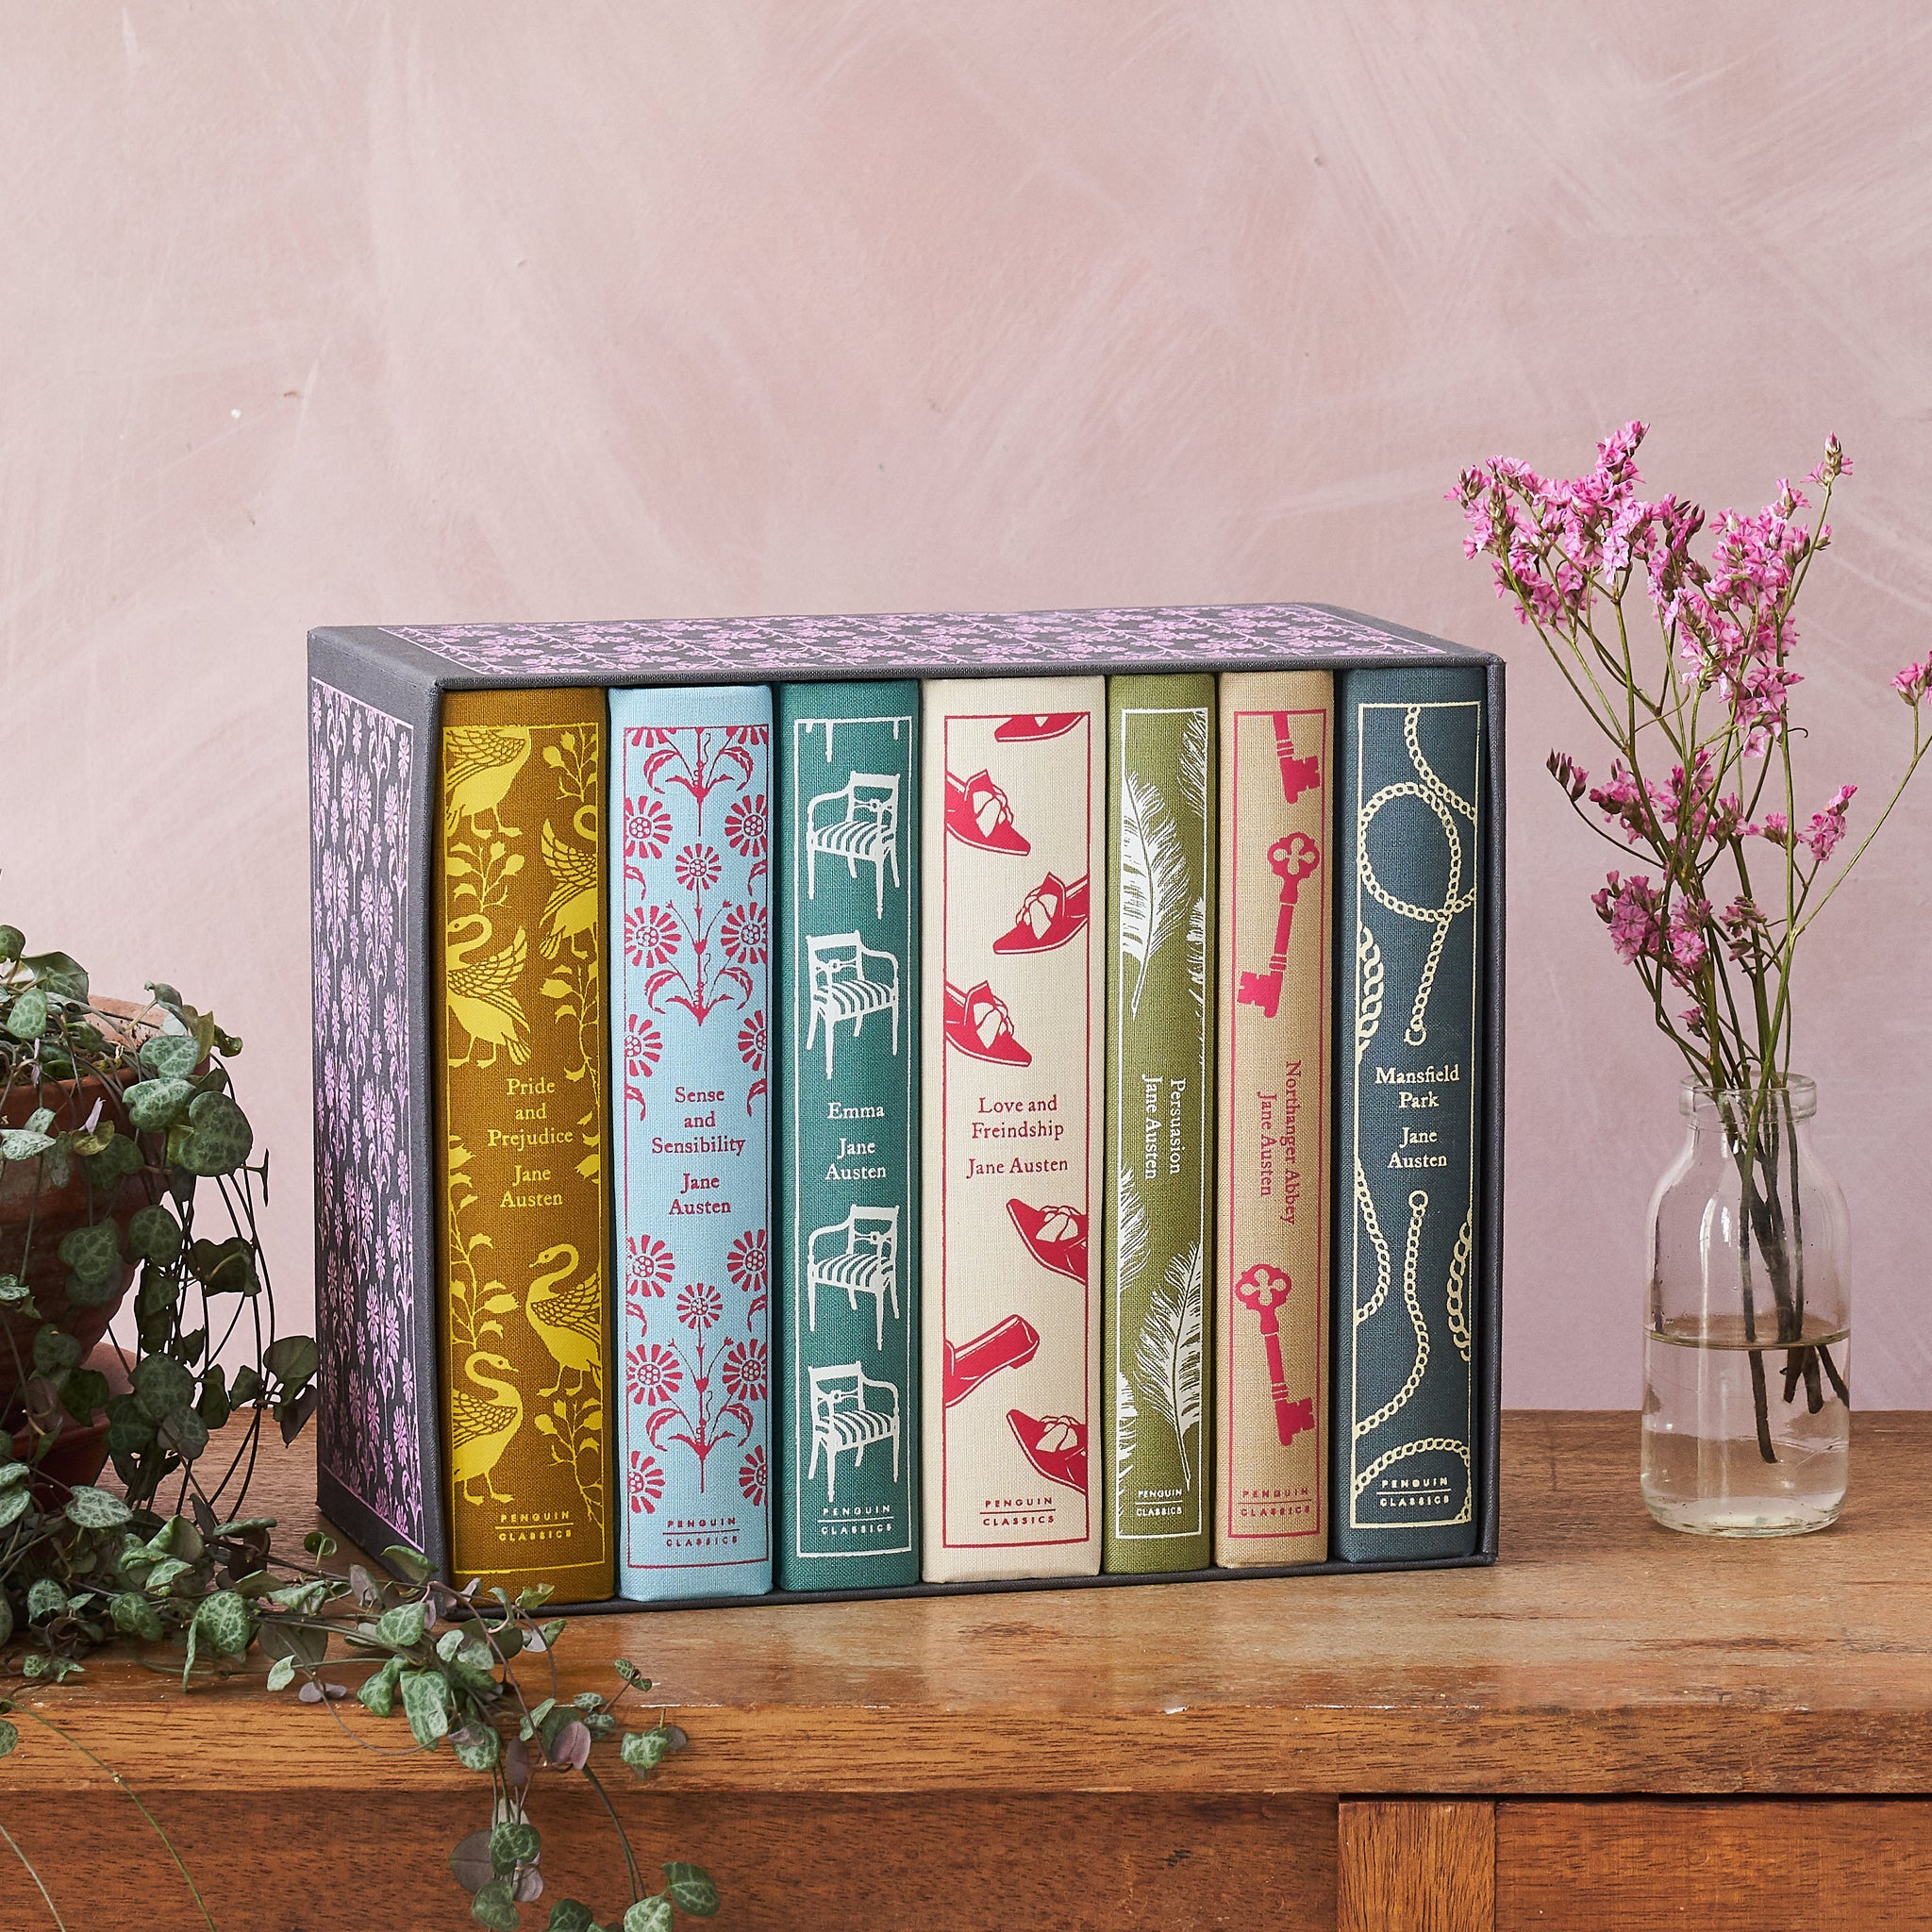 Jane Austen: The Complete Works Boxed Set